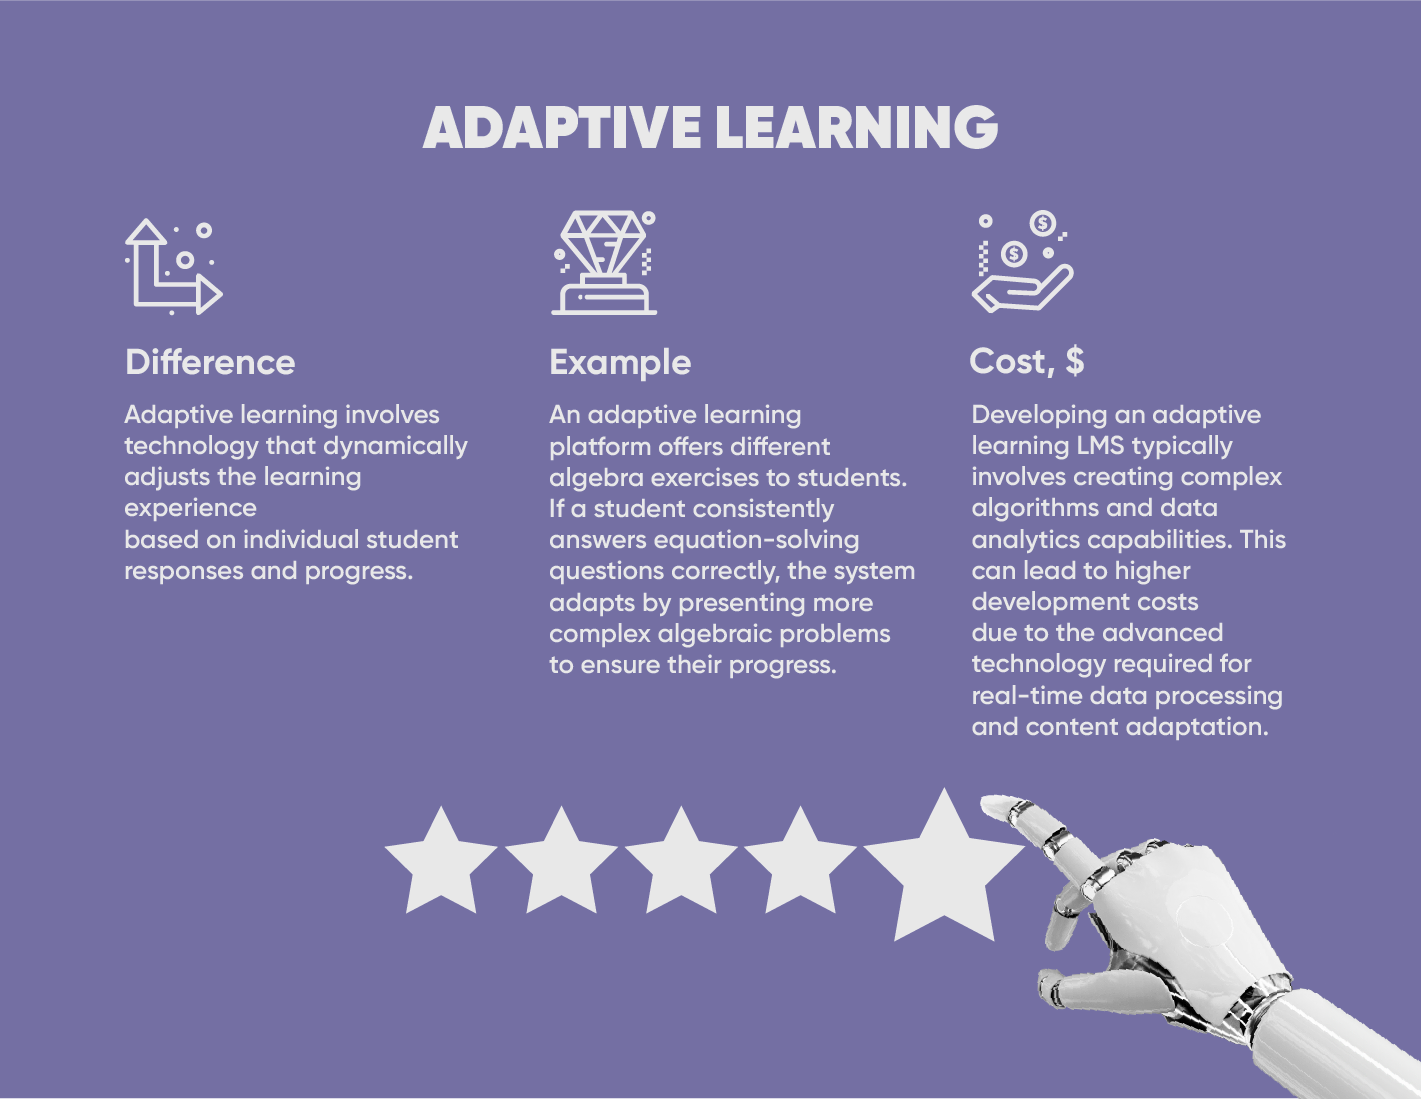 What adaptive learning truly entails